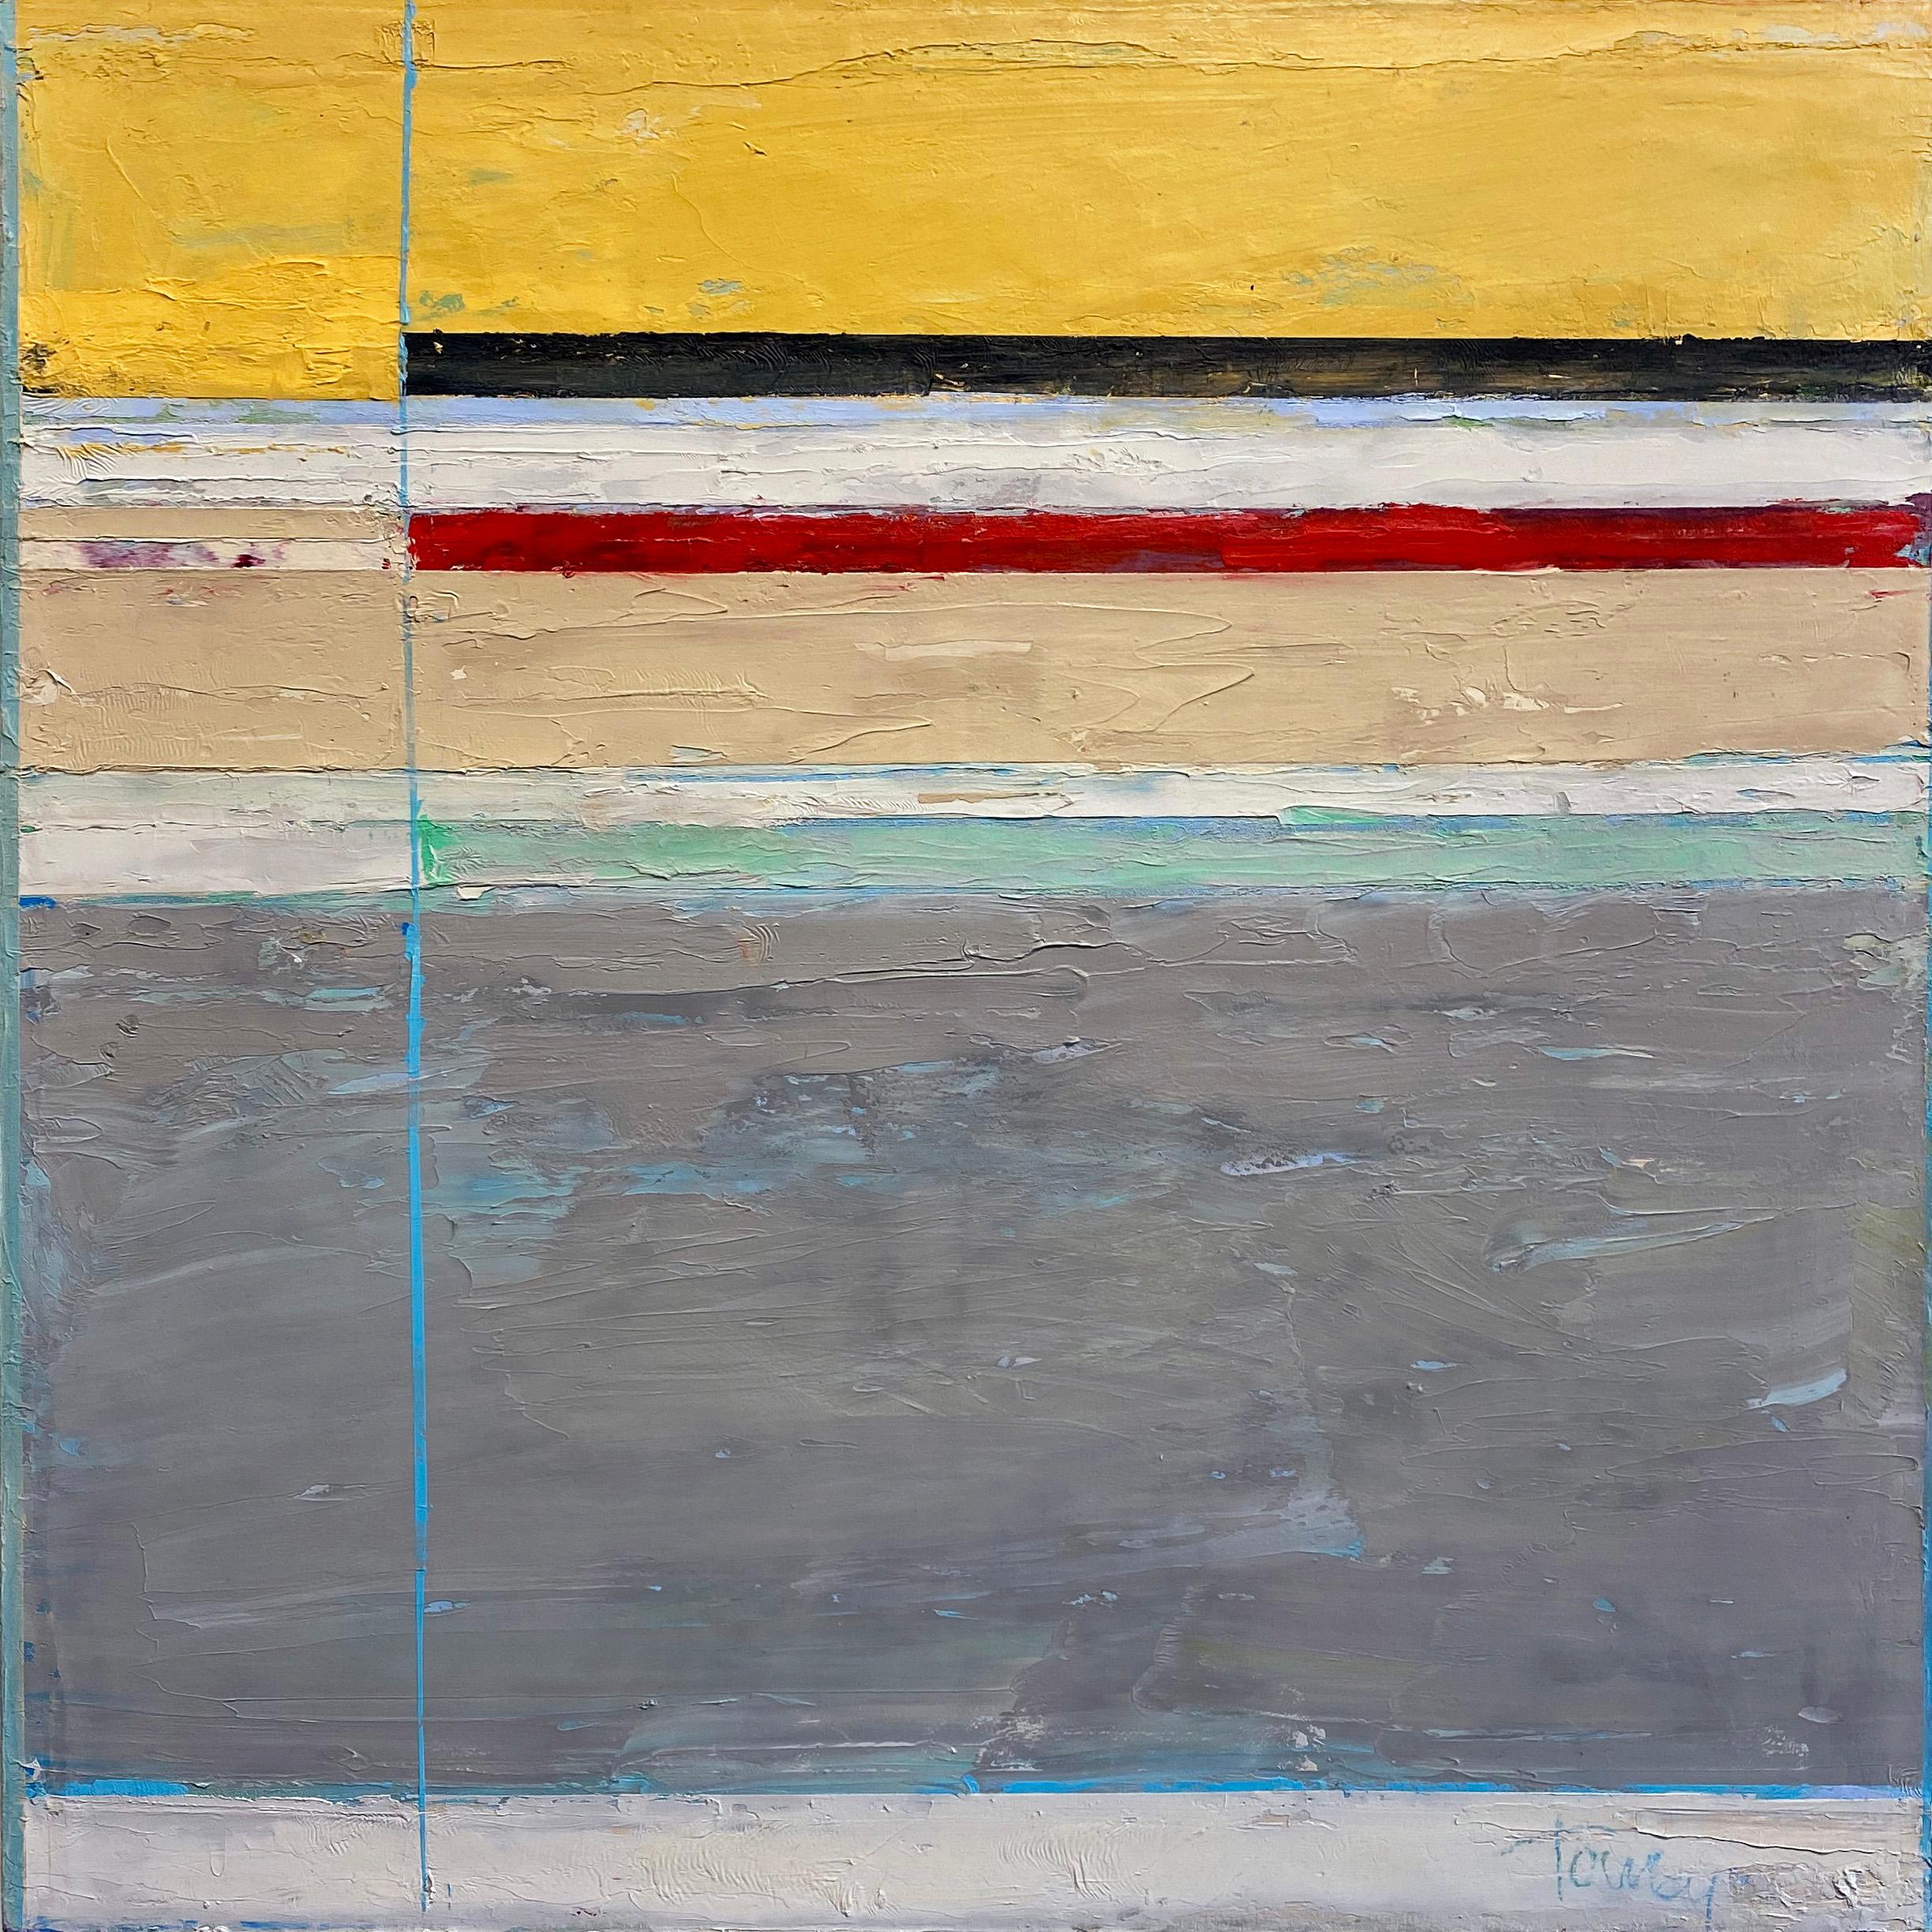 “Pigeons 305” by Linda Touby, circa 2010. Oil and wax on canvas, 30 x 30 inches. This painting features textural stripes of bright pigments including yellow, red, blue, gray, black, and white. 

This beautiful painting is from Linda Touby's popular